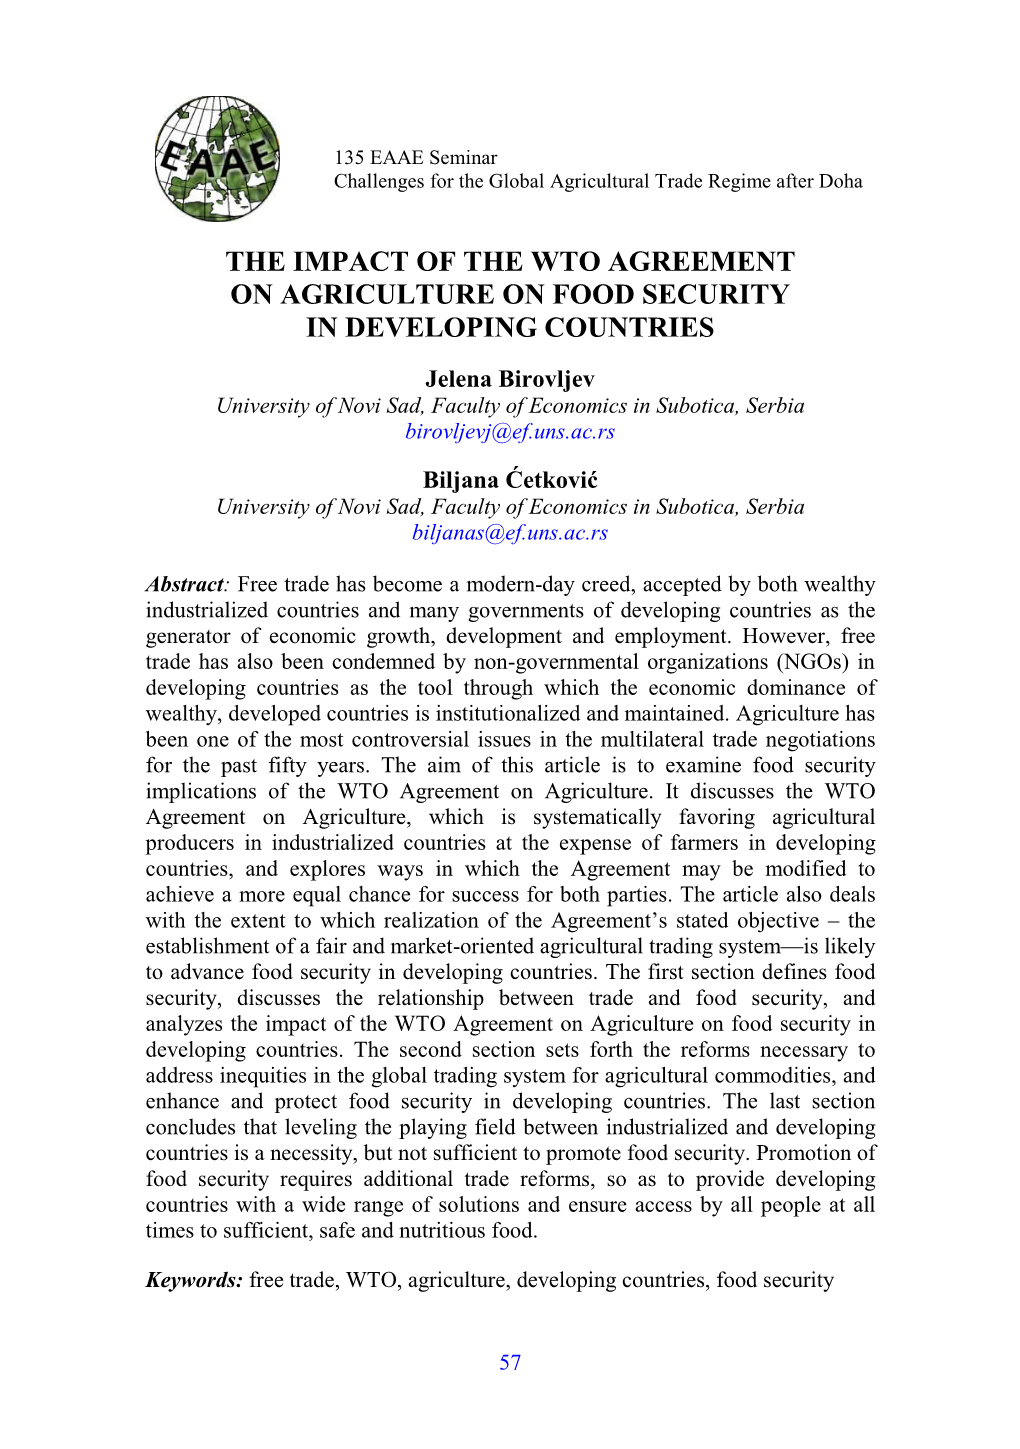 The Impact of the Wto Agreement on Agriculture on Food Security in Developing Countries